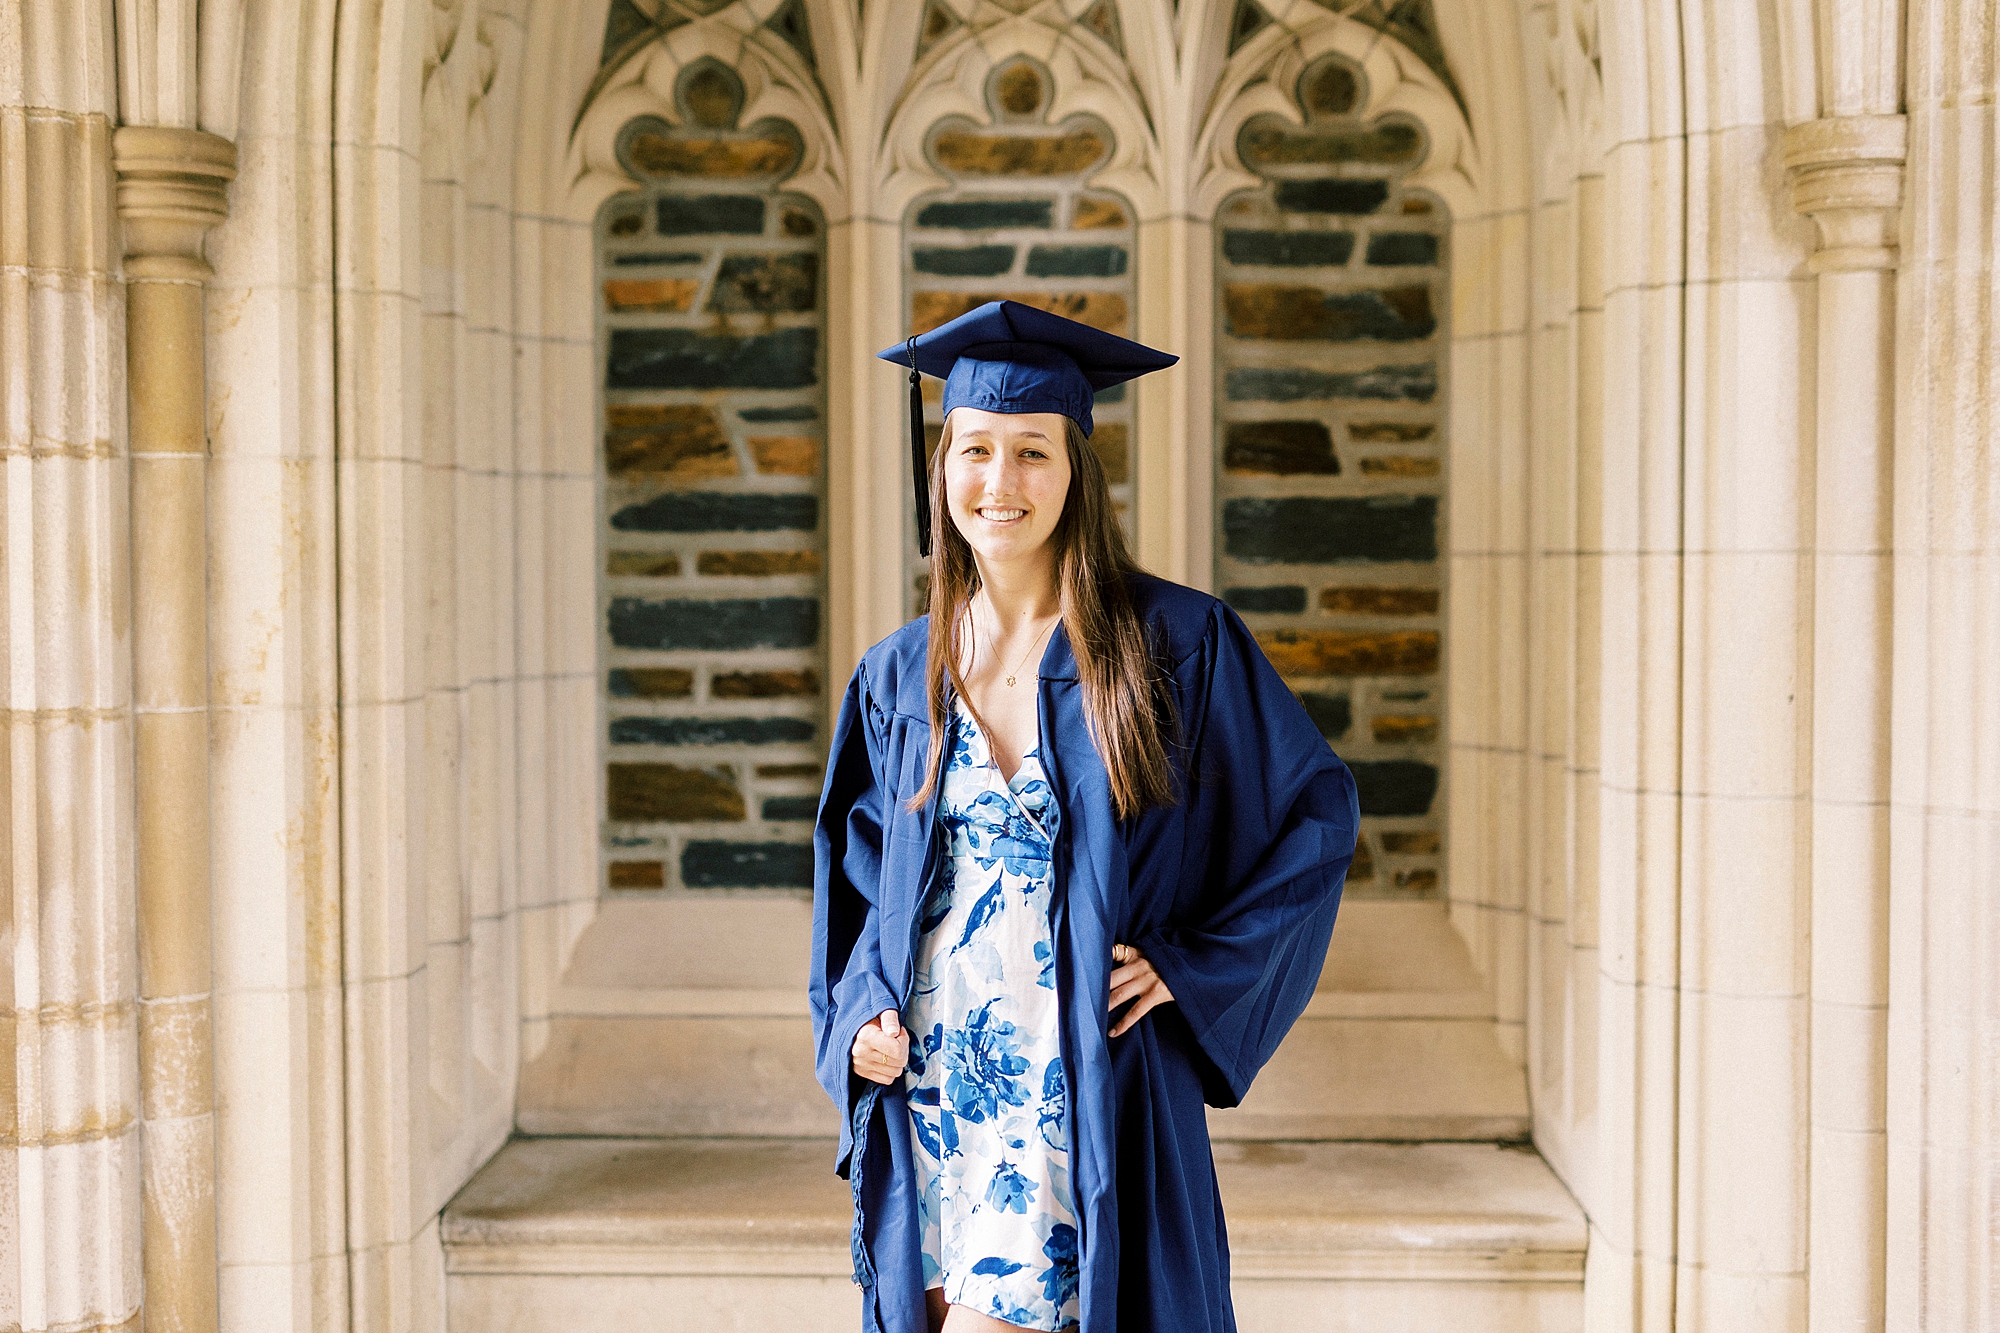 Duke University senior portraits for girl in blue and white flower dress with navy cap and gown